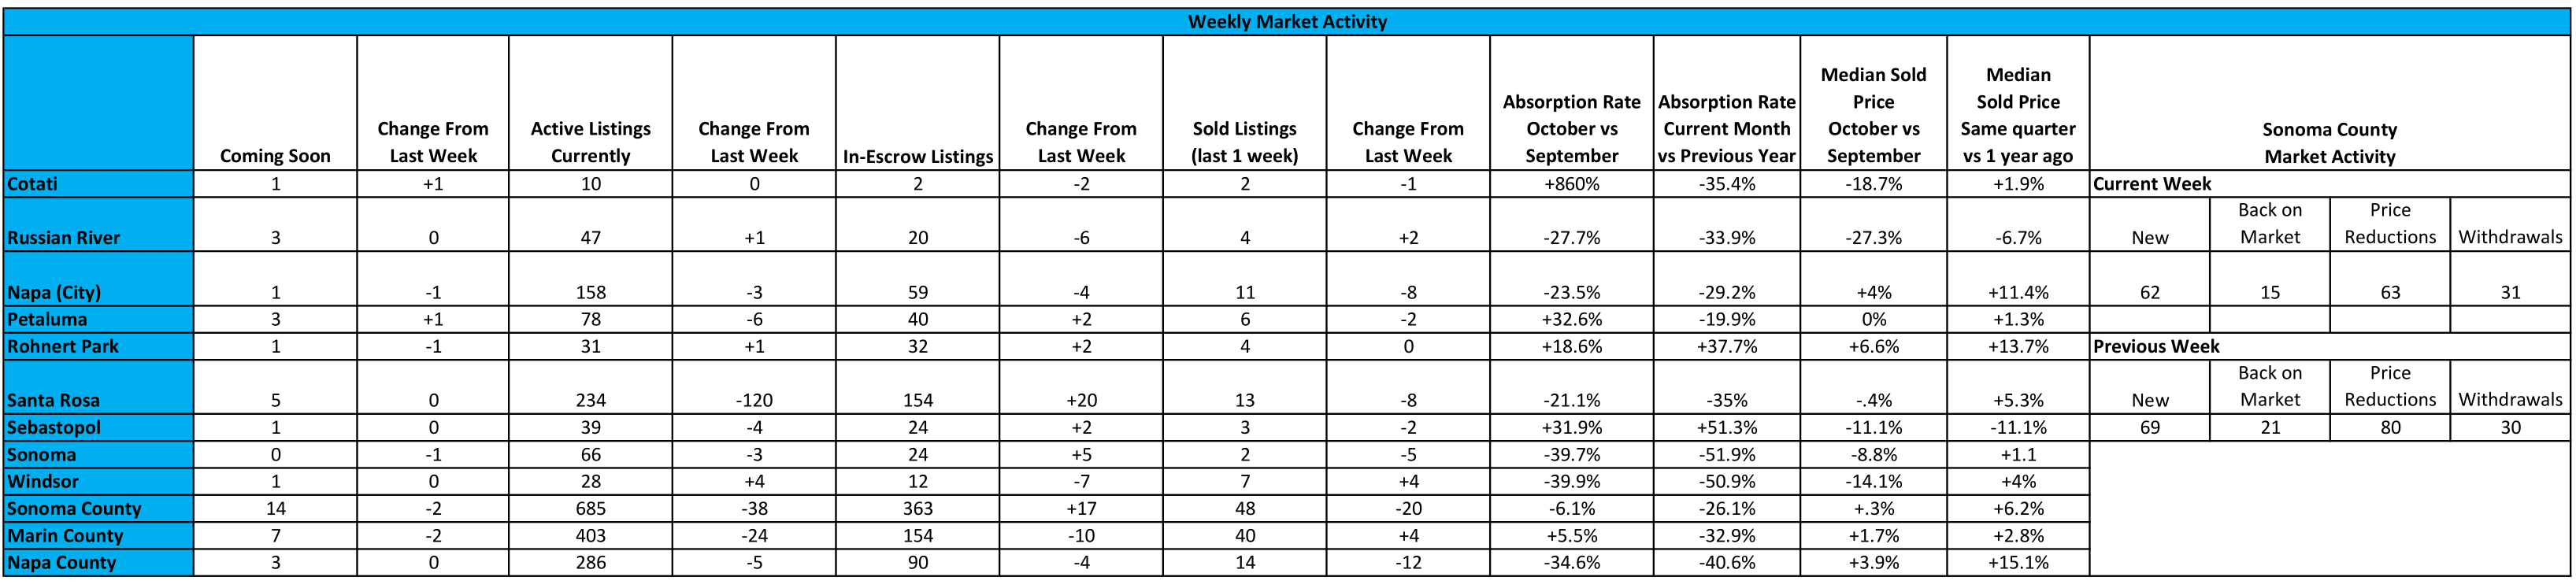 This graph shows North Bay Real Estate Market activity for the week of 11/12/22 through 11/18/22. This includes Sonoma, Marin, and Napa County.